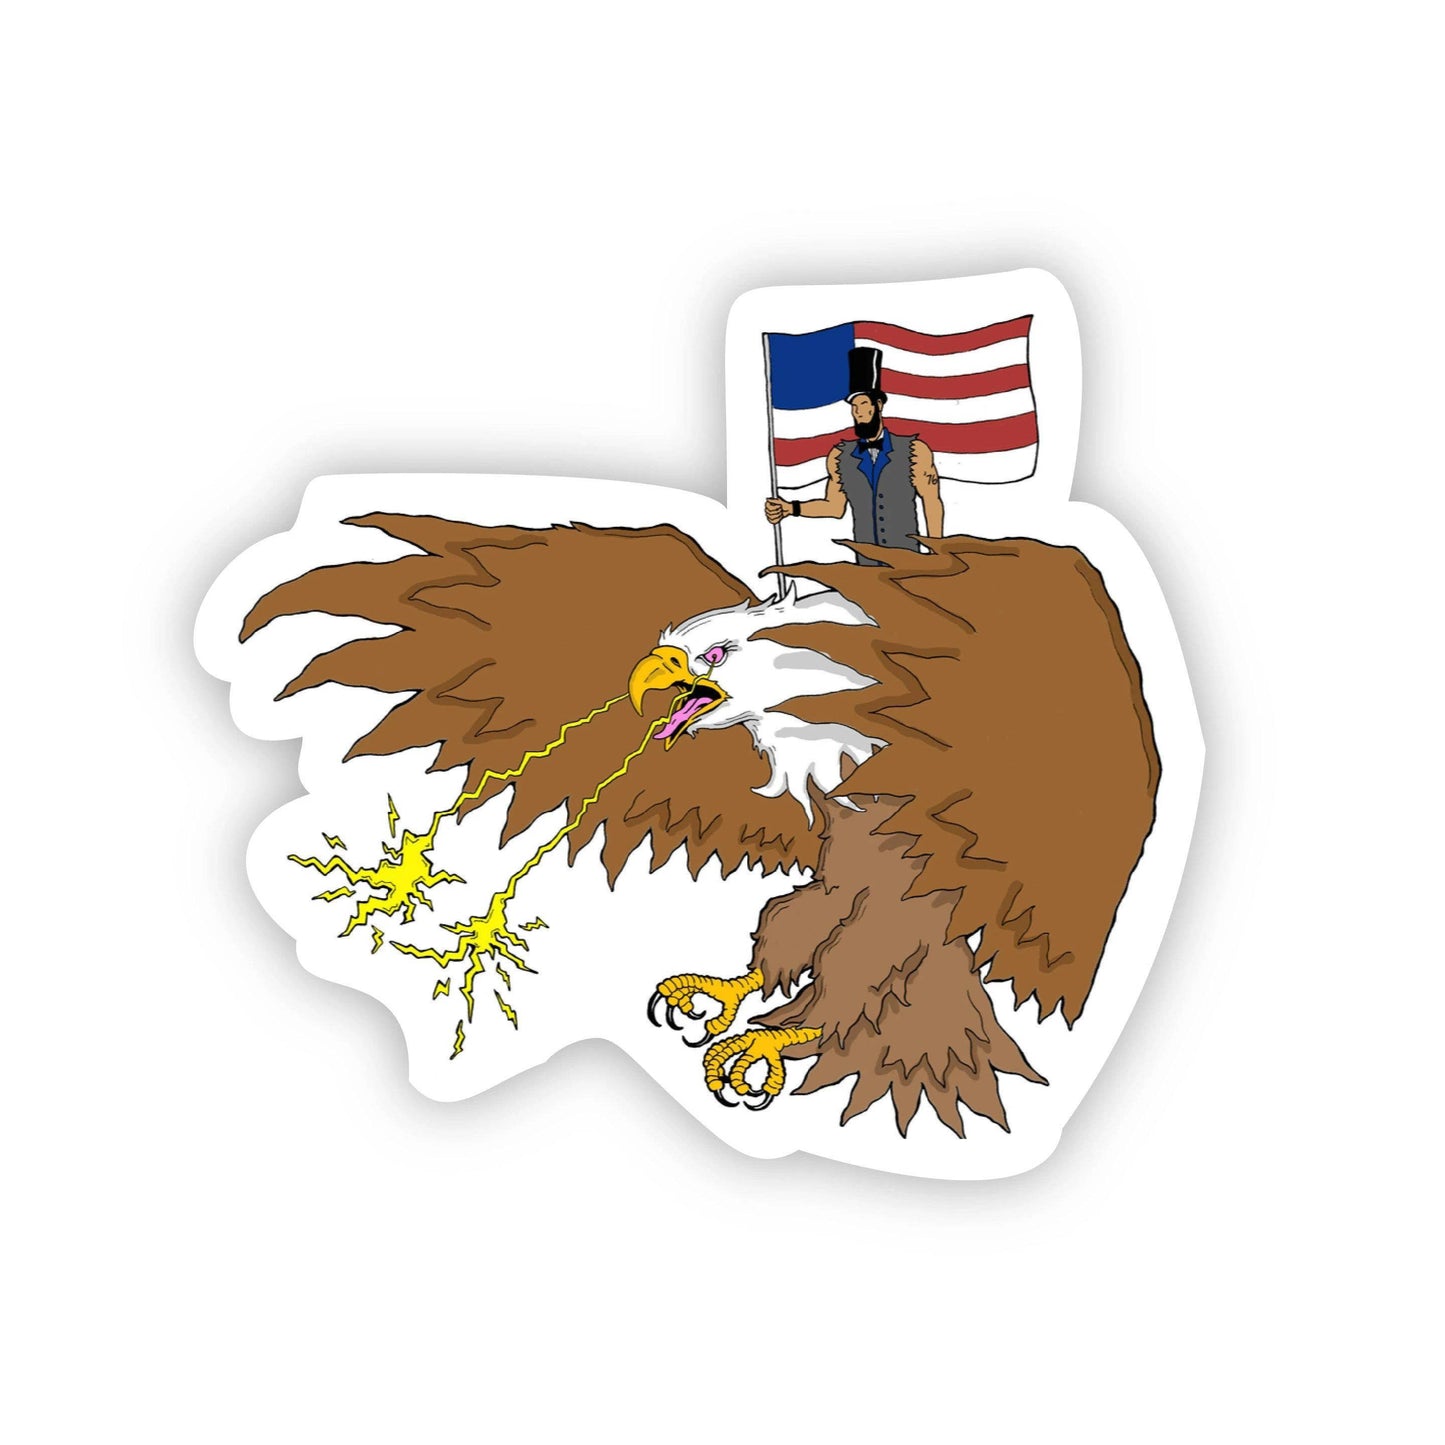 Abraham Lincoln Riding Eagle with Laser Beam Eyes Sticker